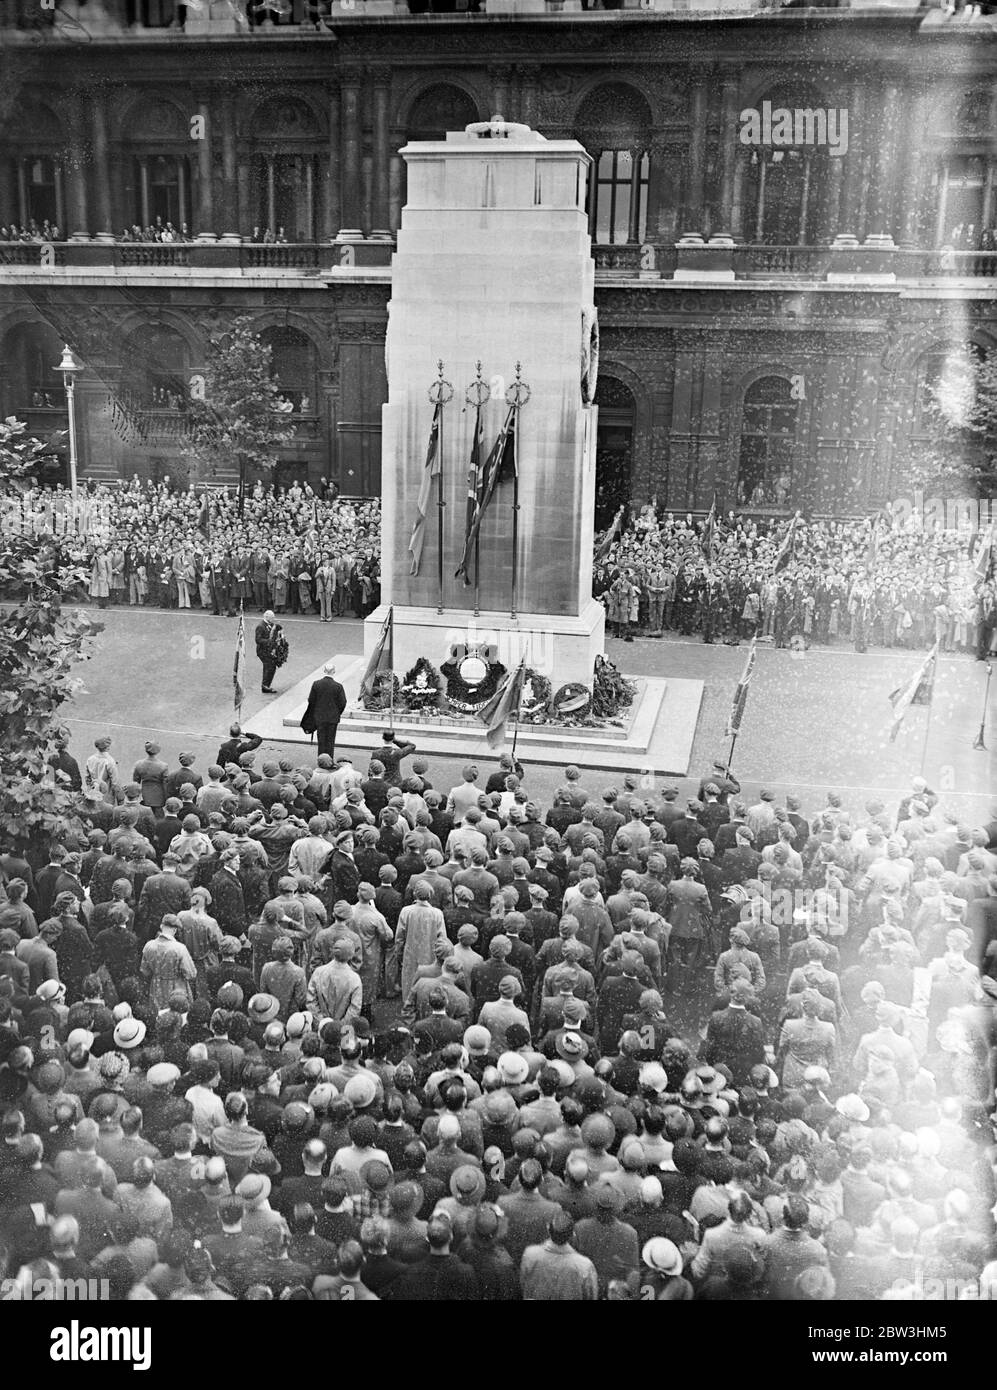 Canadian Pilgrims Attend Special Ceremony At The Cenotaph . Canadian piligrims who attended the unveiling of the Vimy Bridge Memorial and are making a visit to London , paraded for a special service at the Cenotaph in Whitehall . Nearly half the pilgrims are women war widows or relatives of men who fell in France . Photo shows : One of the Canadian pilgrims laying a wreath on the Cenotaph . 29 Jul 1936 Stock Photo